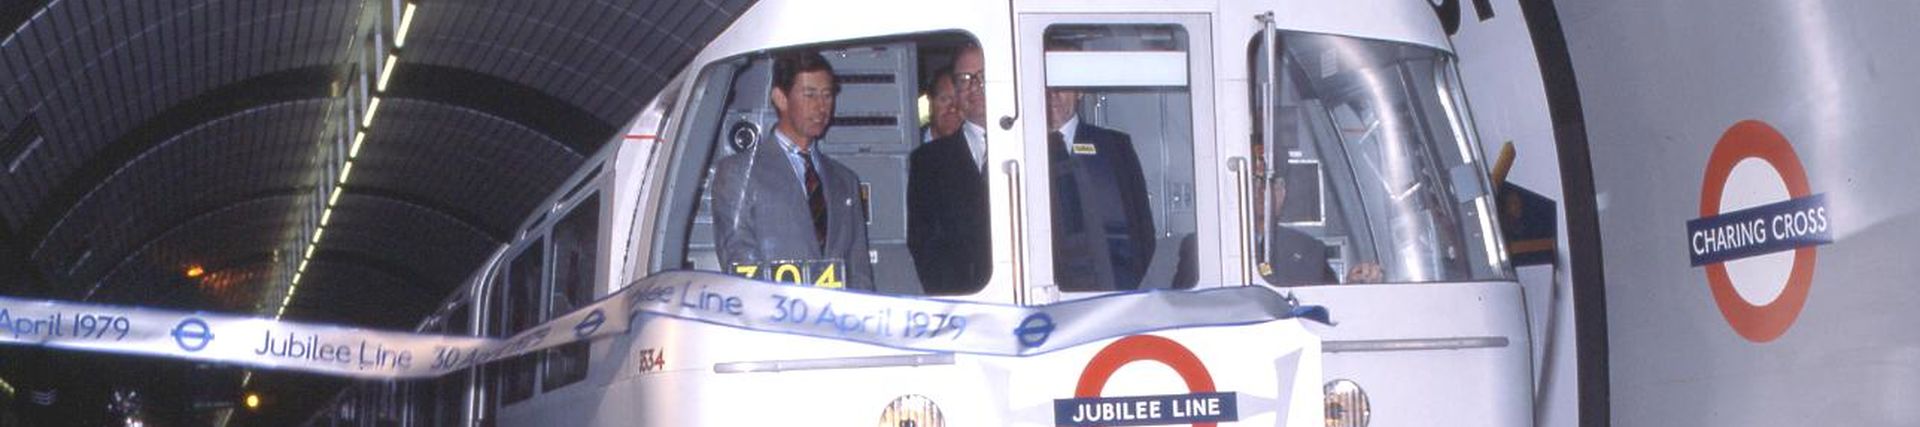 HRH Prince Charles opening the Jubilee line, 30 April 1979 